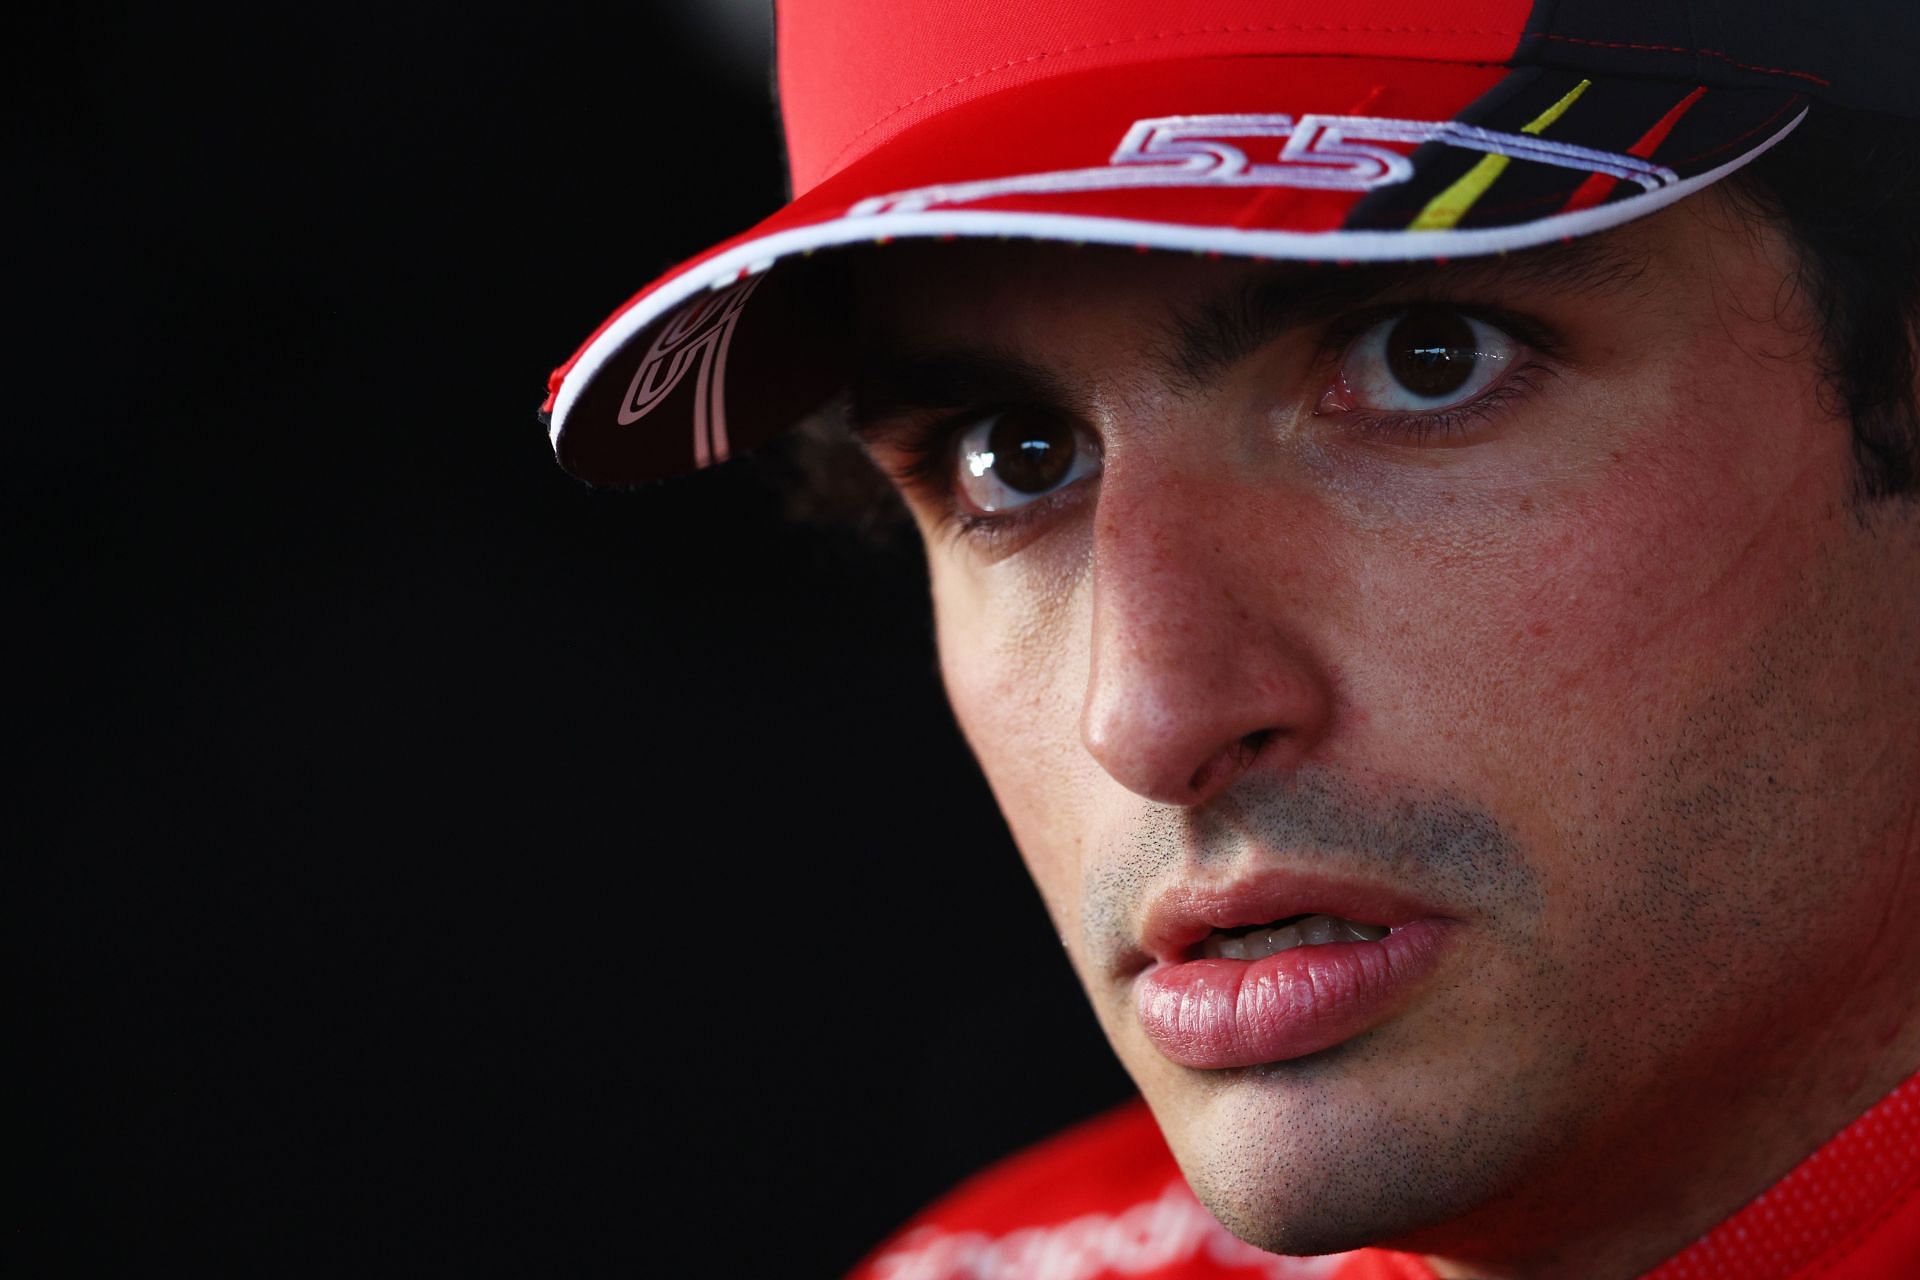 Ferrari driver Carlos Sainz after qualifying for the 2022 F1 Azerbaijan GP. (Photo by Clive Rose/Getty Images)